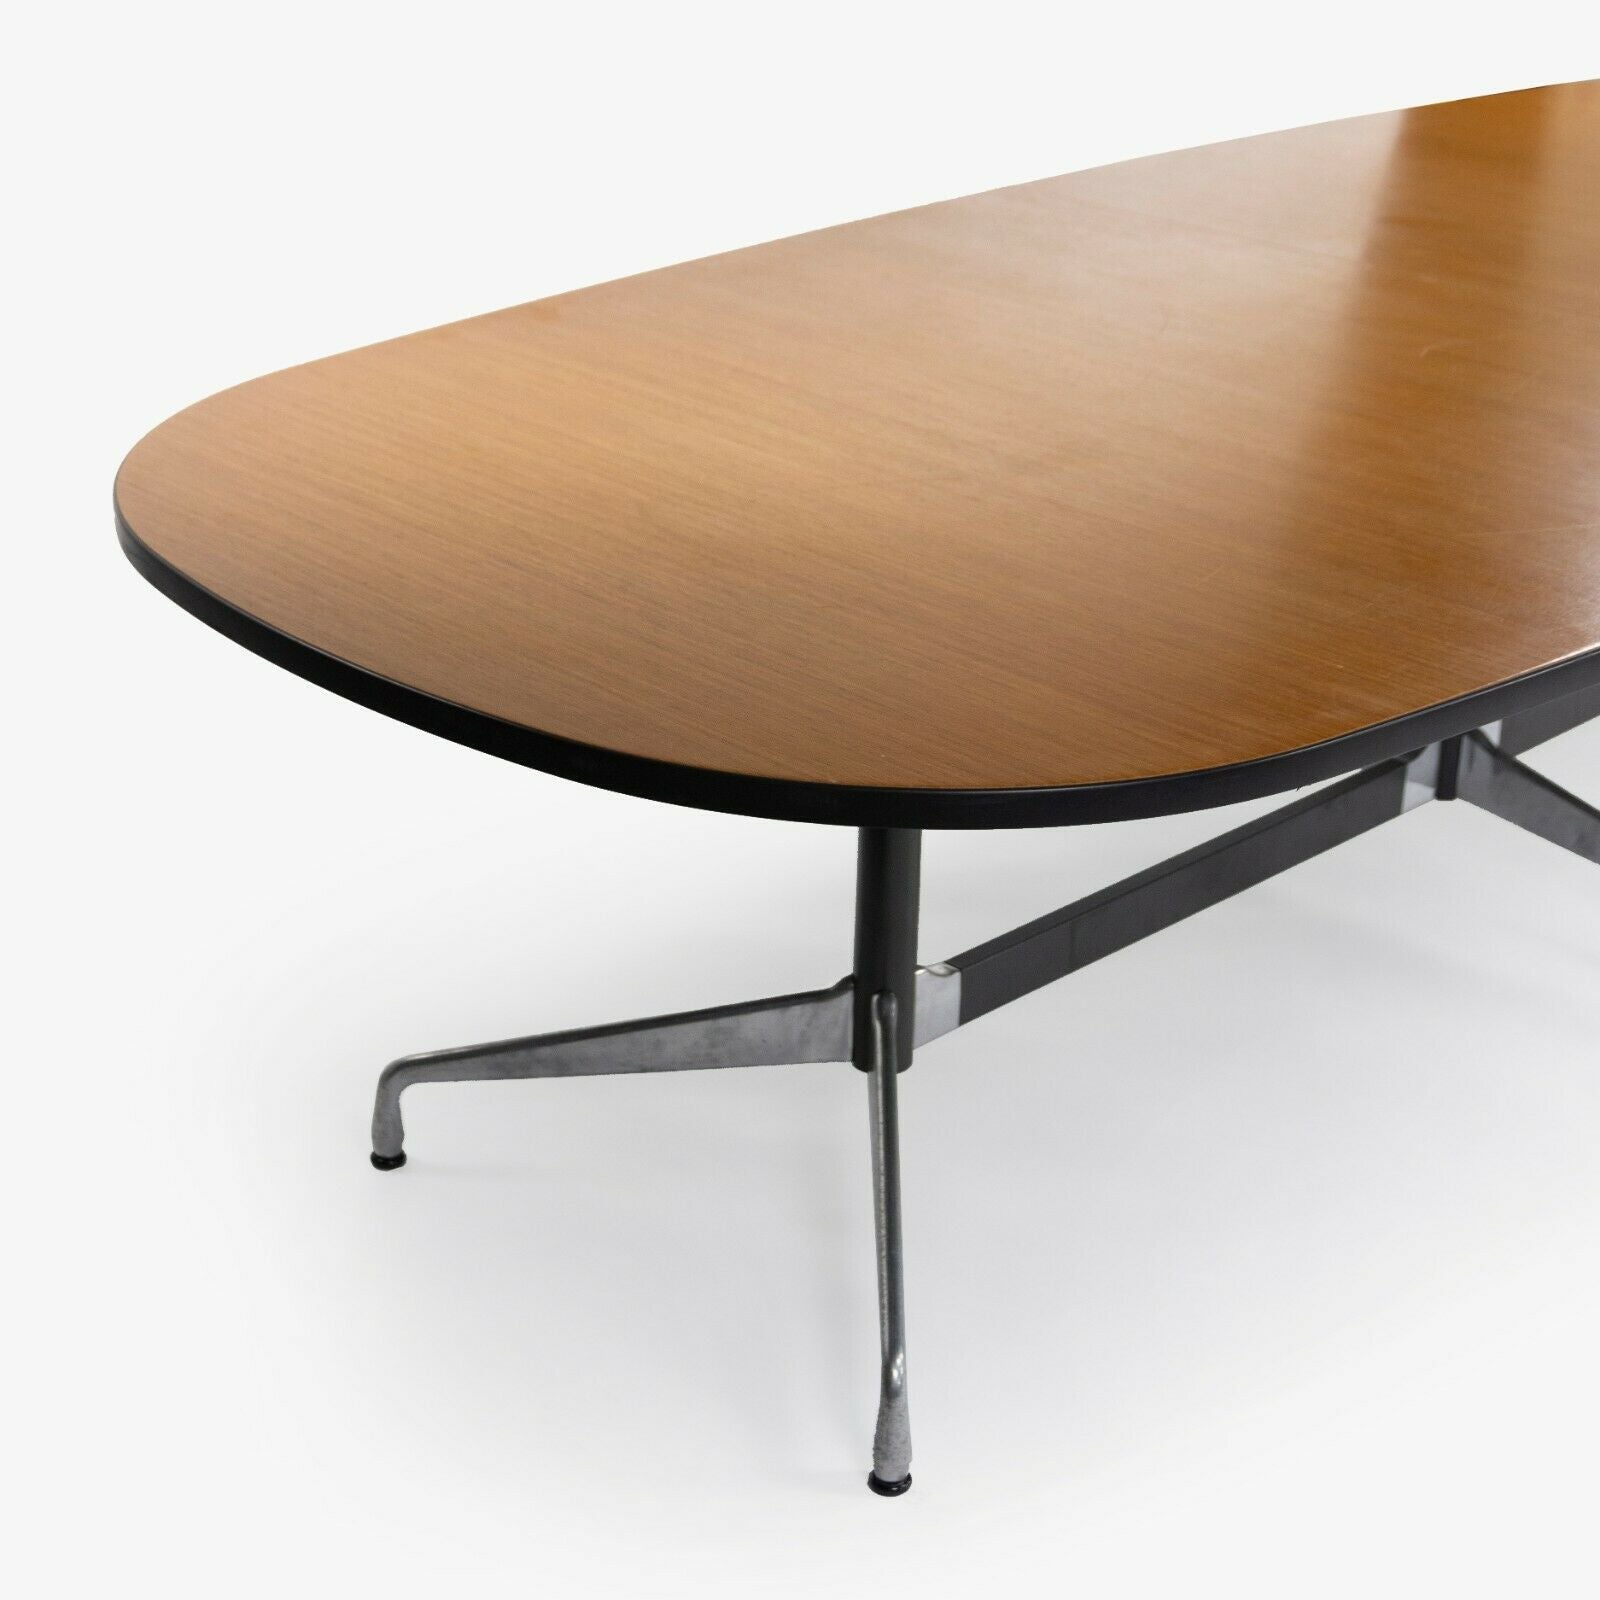 SOLD 2003 Herman Miller Eames Segmented Aluminum and Ash 10 Foot Conference Table